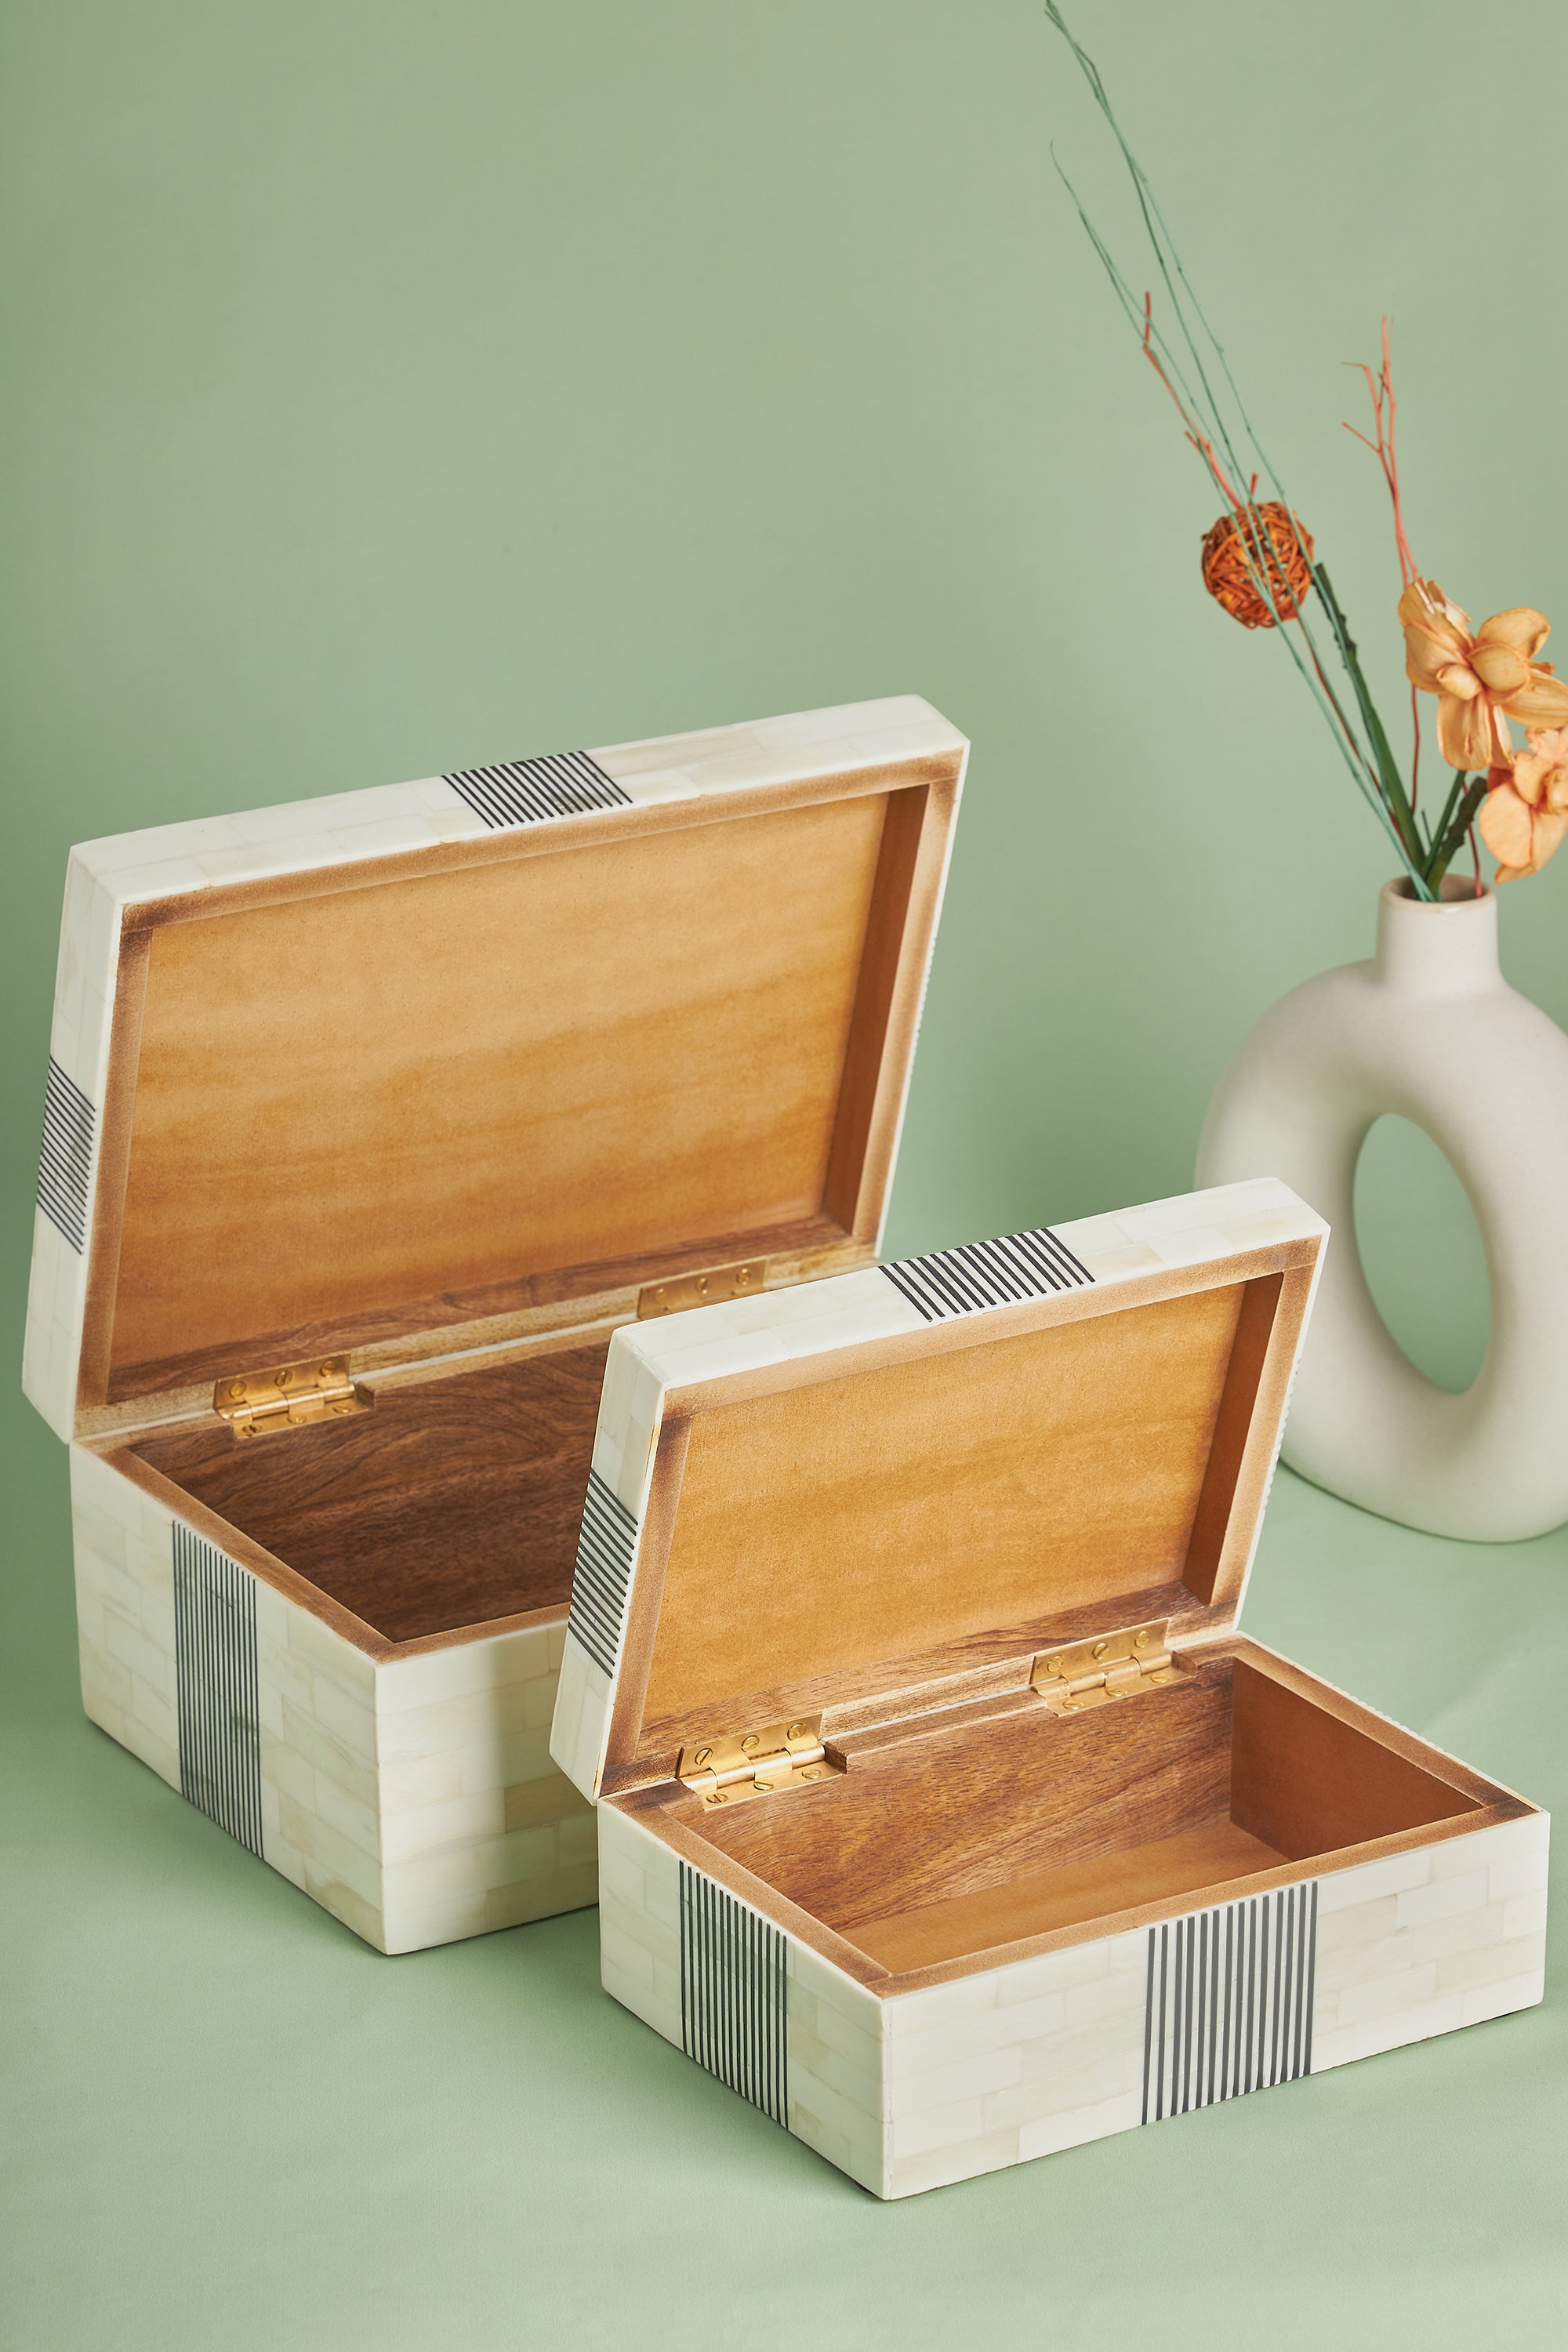 Fashion Jewelry Wooden Boxes Set of 2